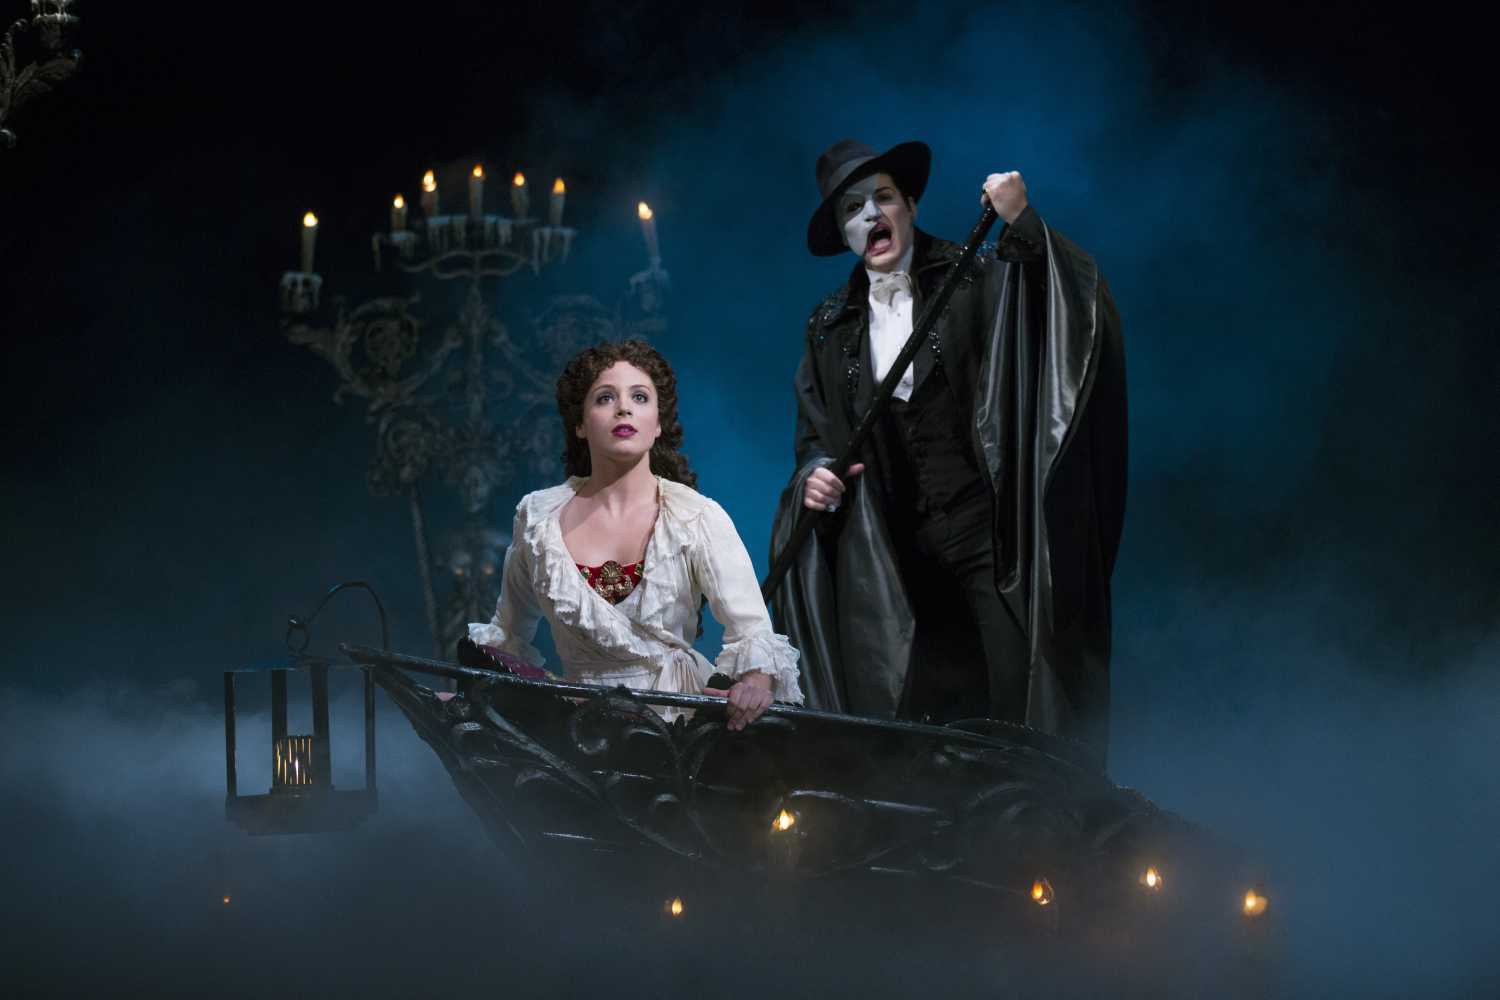 Watch Phantom of the Opera for free today | Time In 2020 ...